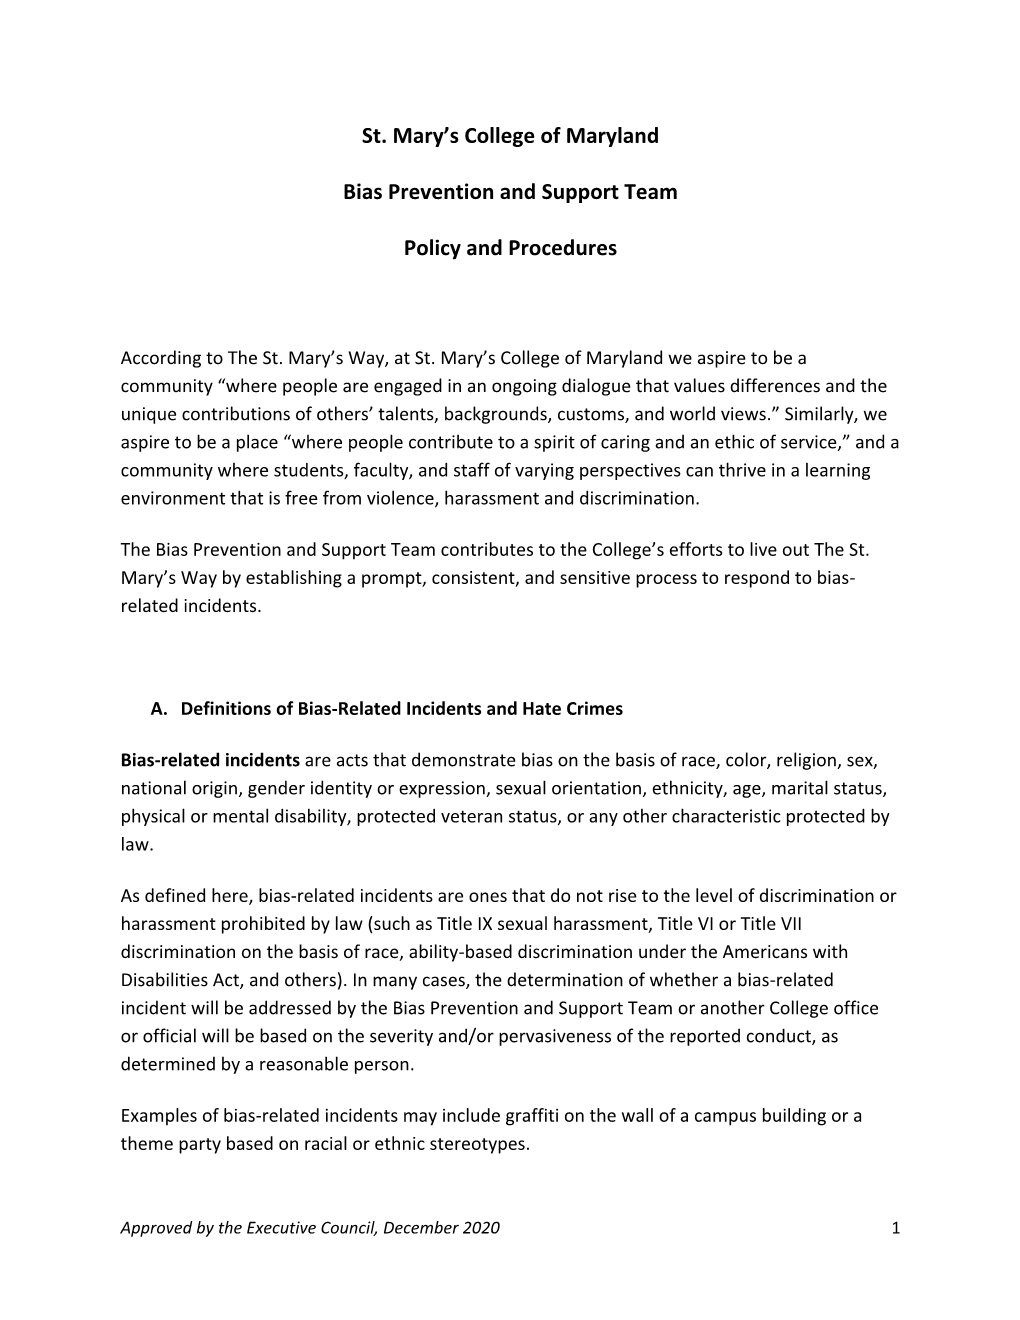 St. Mary's College of Maryland Bias Prevention and Support Team Policy and Procedures